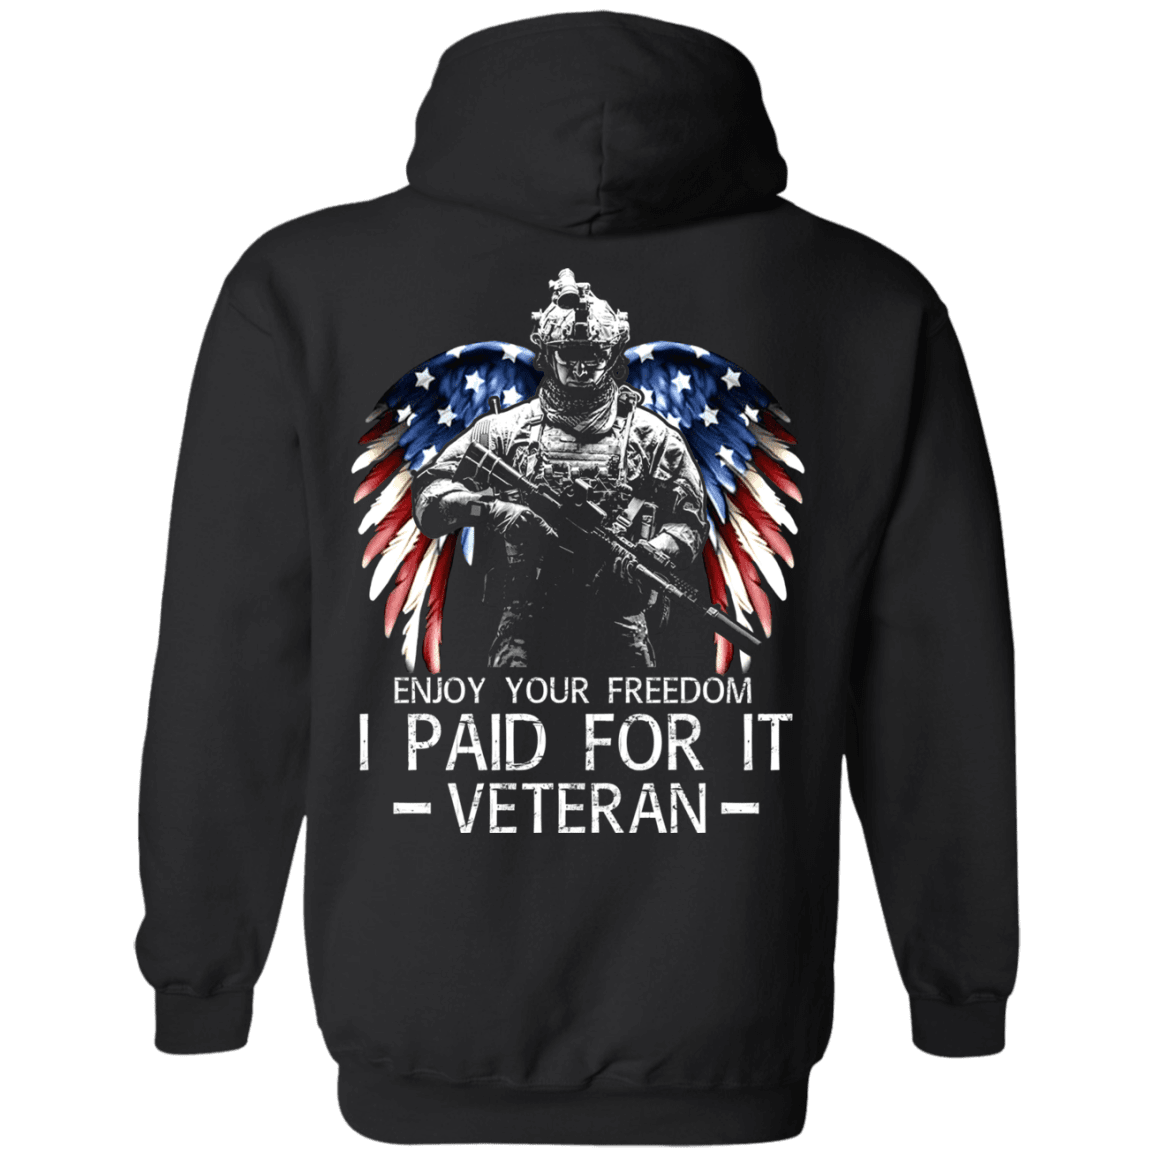 Military T-Shirt "Enjoy your freedom I paid for it" Men Back-TShirt-General-Veterans Nation